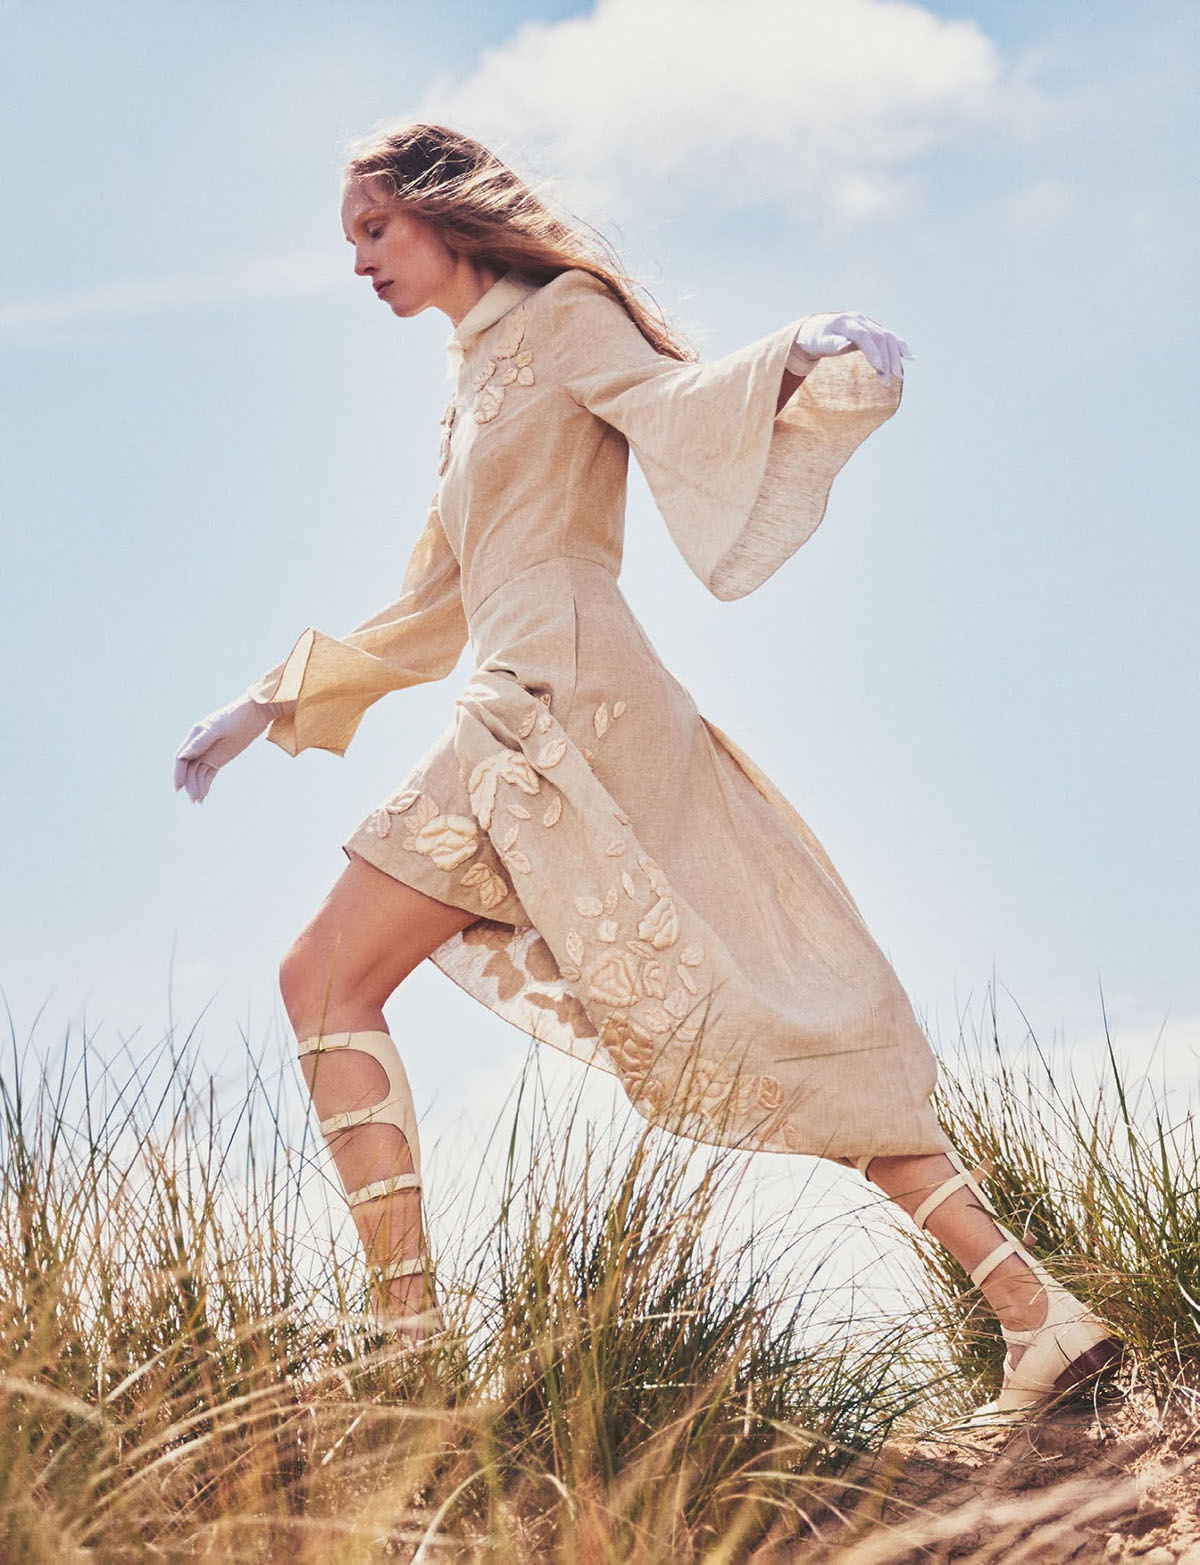 Bianca O'Brien by Thomas Cooksey for Tatler UK August 2021